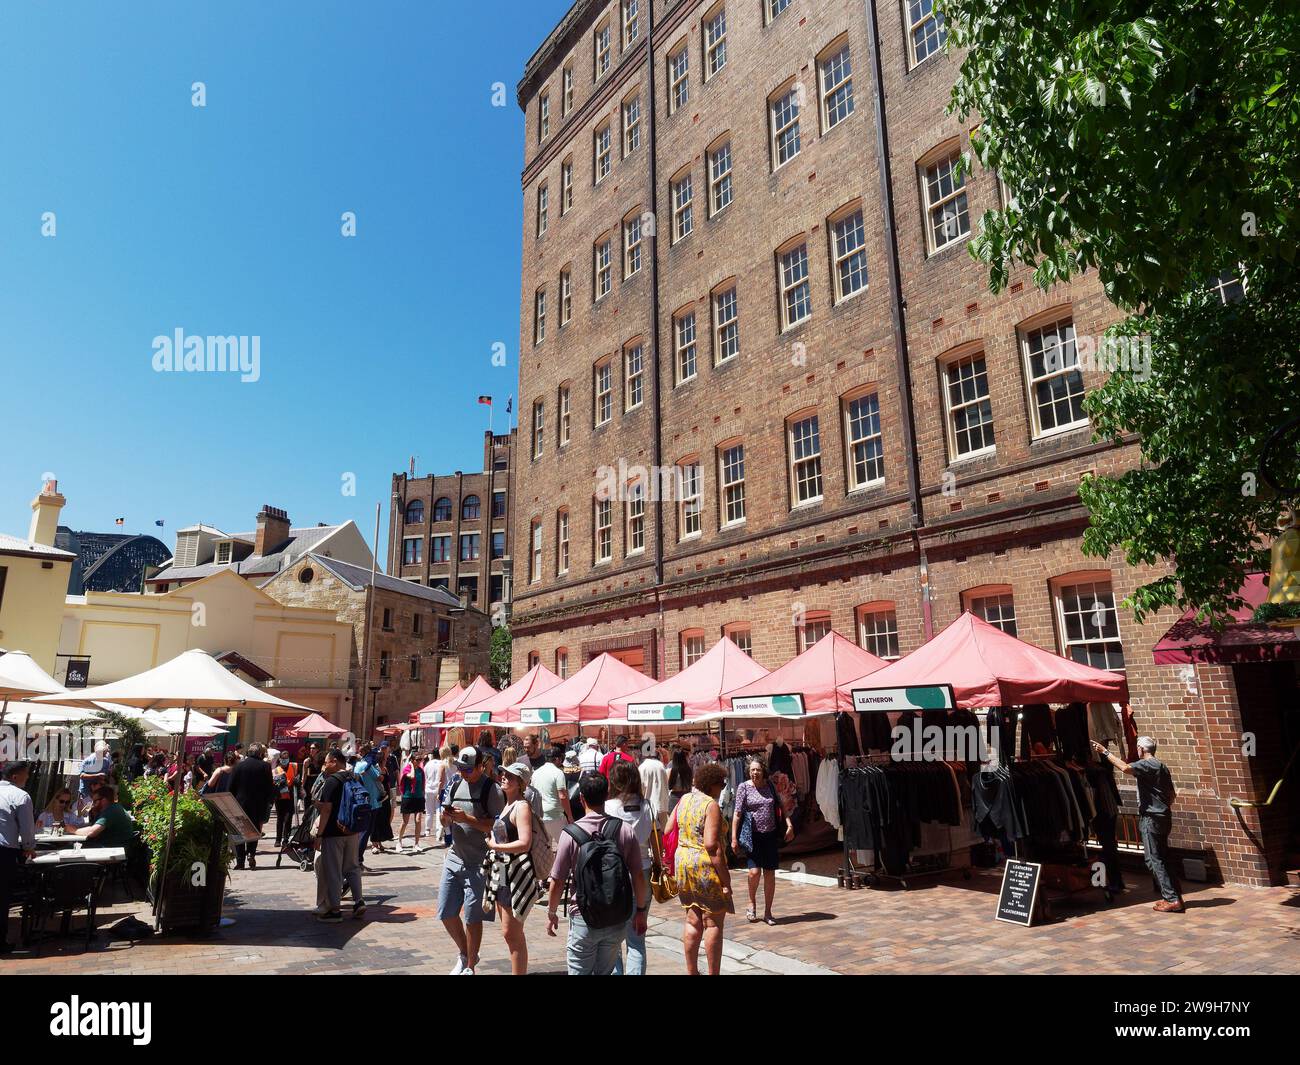 View of tourists and shoppers walking through the colourful shops cafes and market stalls in The Rocks district of Sydney Australia Stock Photo